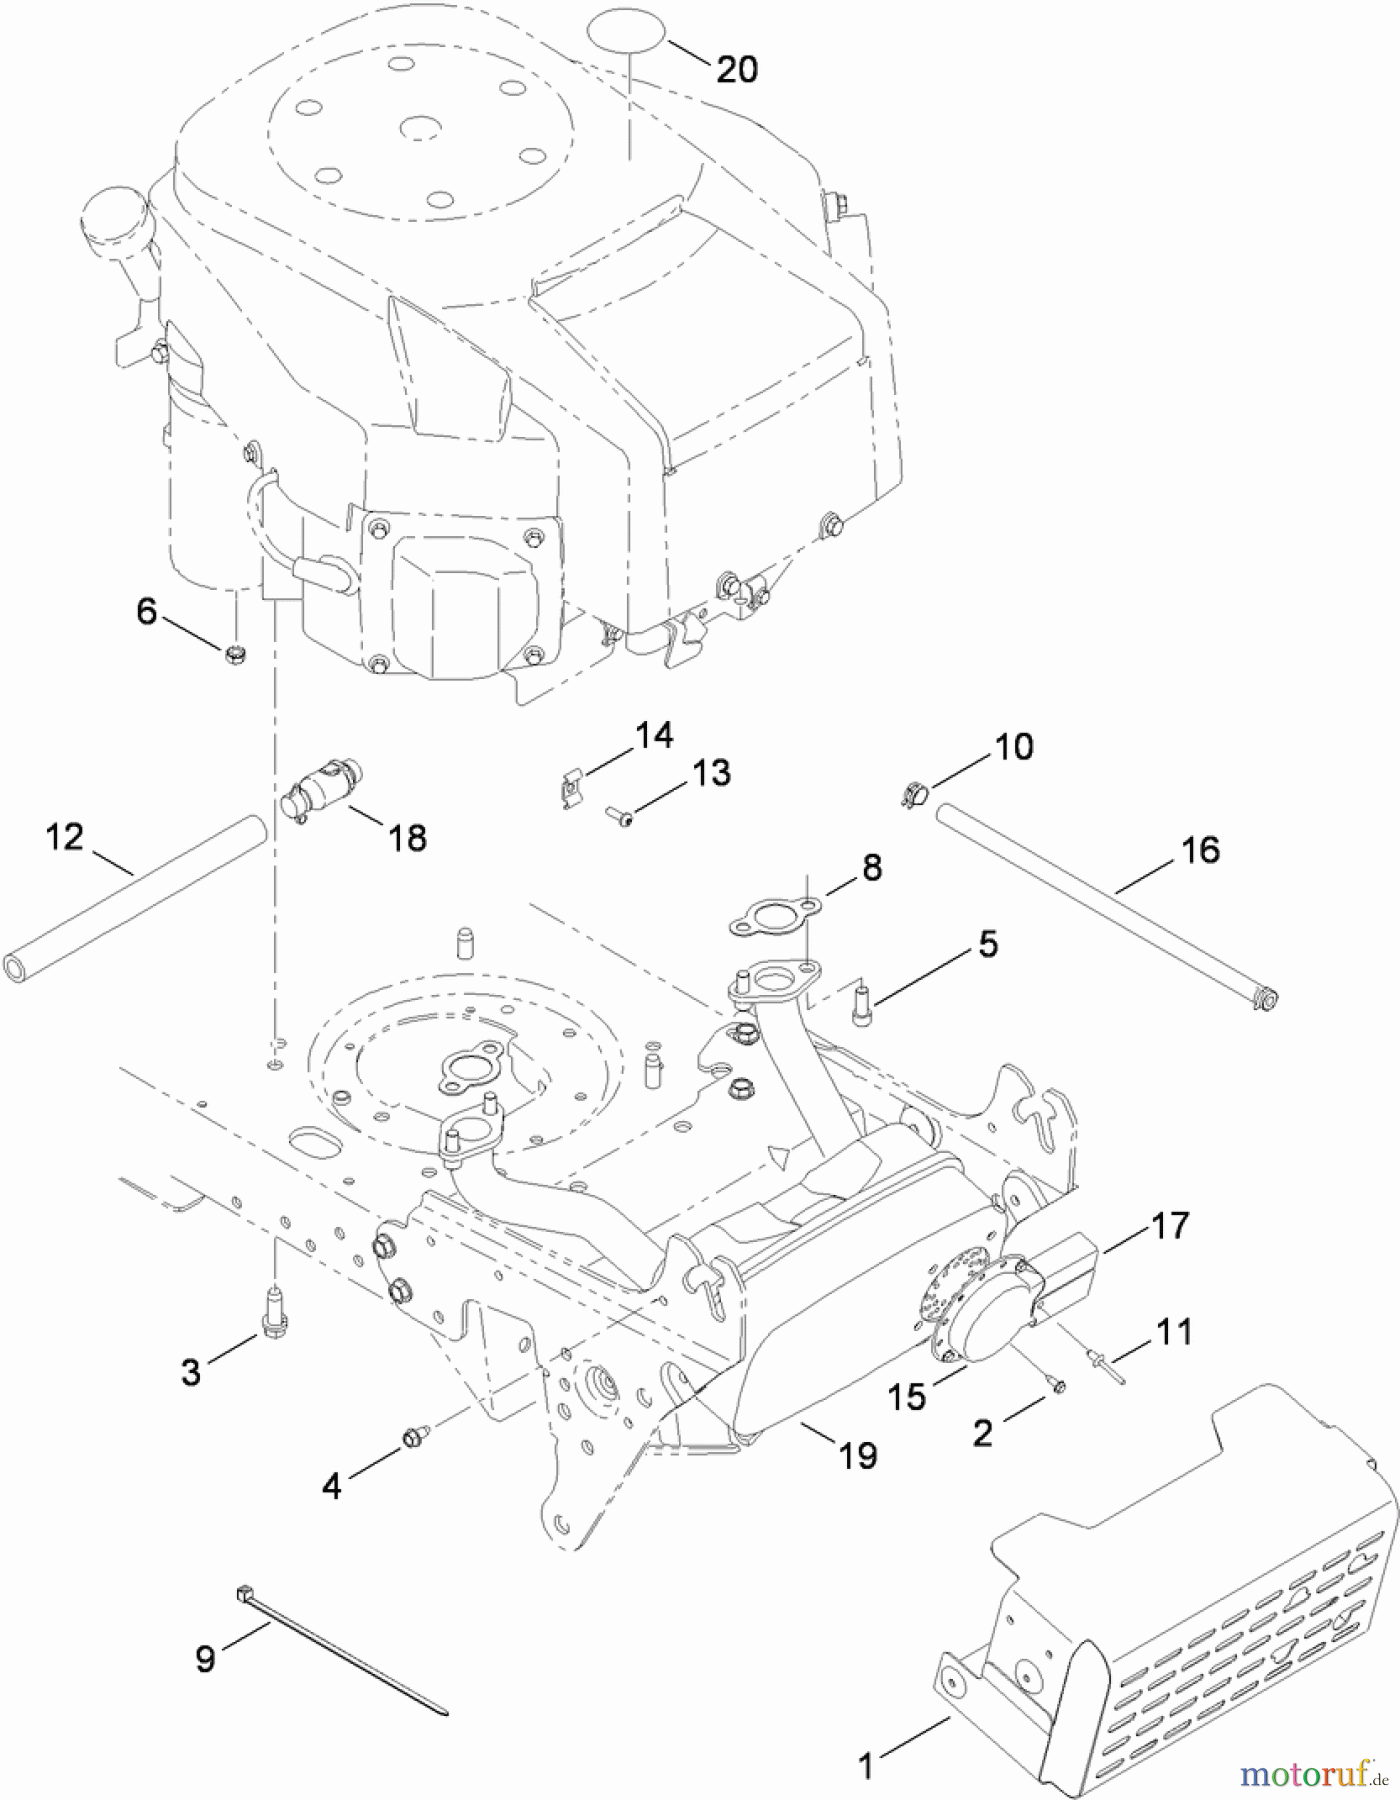  Toro Neu Mowers, Lawn & Garden Tractor Seite 1 13AP91RT848 (LX468) - Toro LX468 Lawn Tractor, 2010 (1-1) ENGINE COMPONENT ASSEMBLY